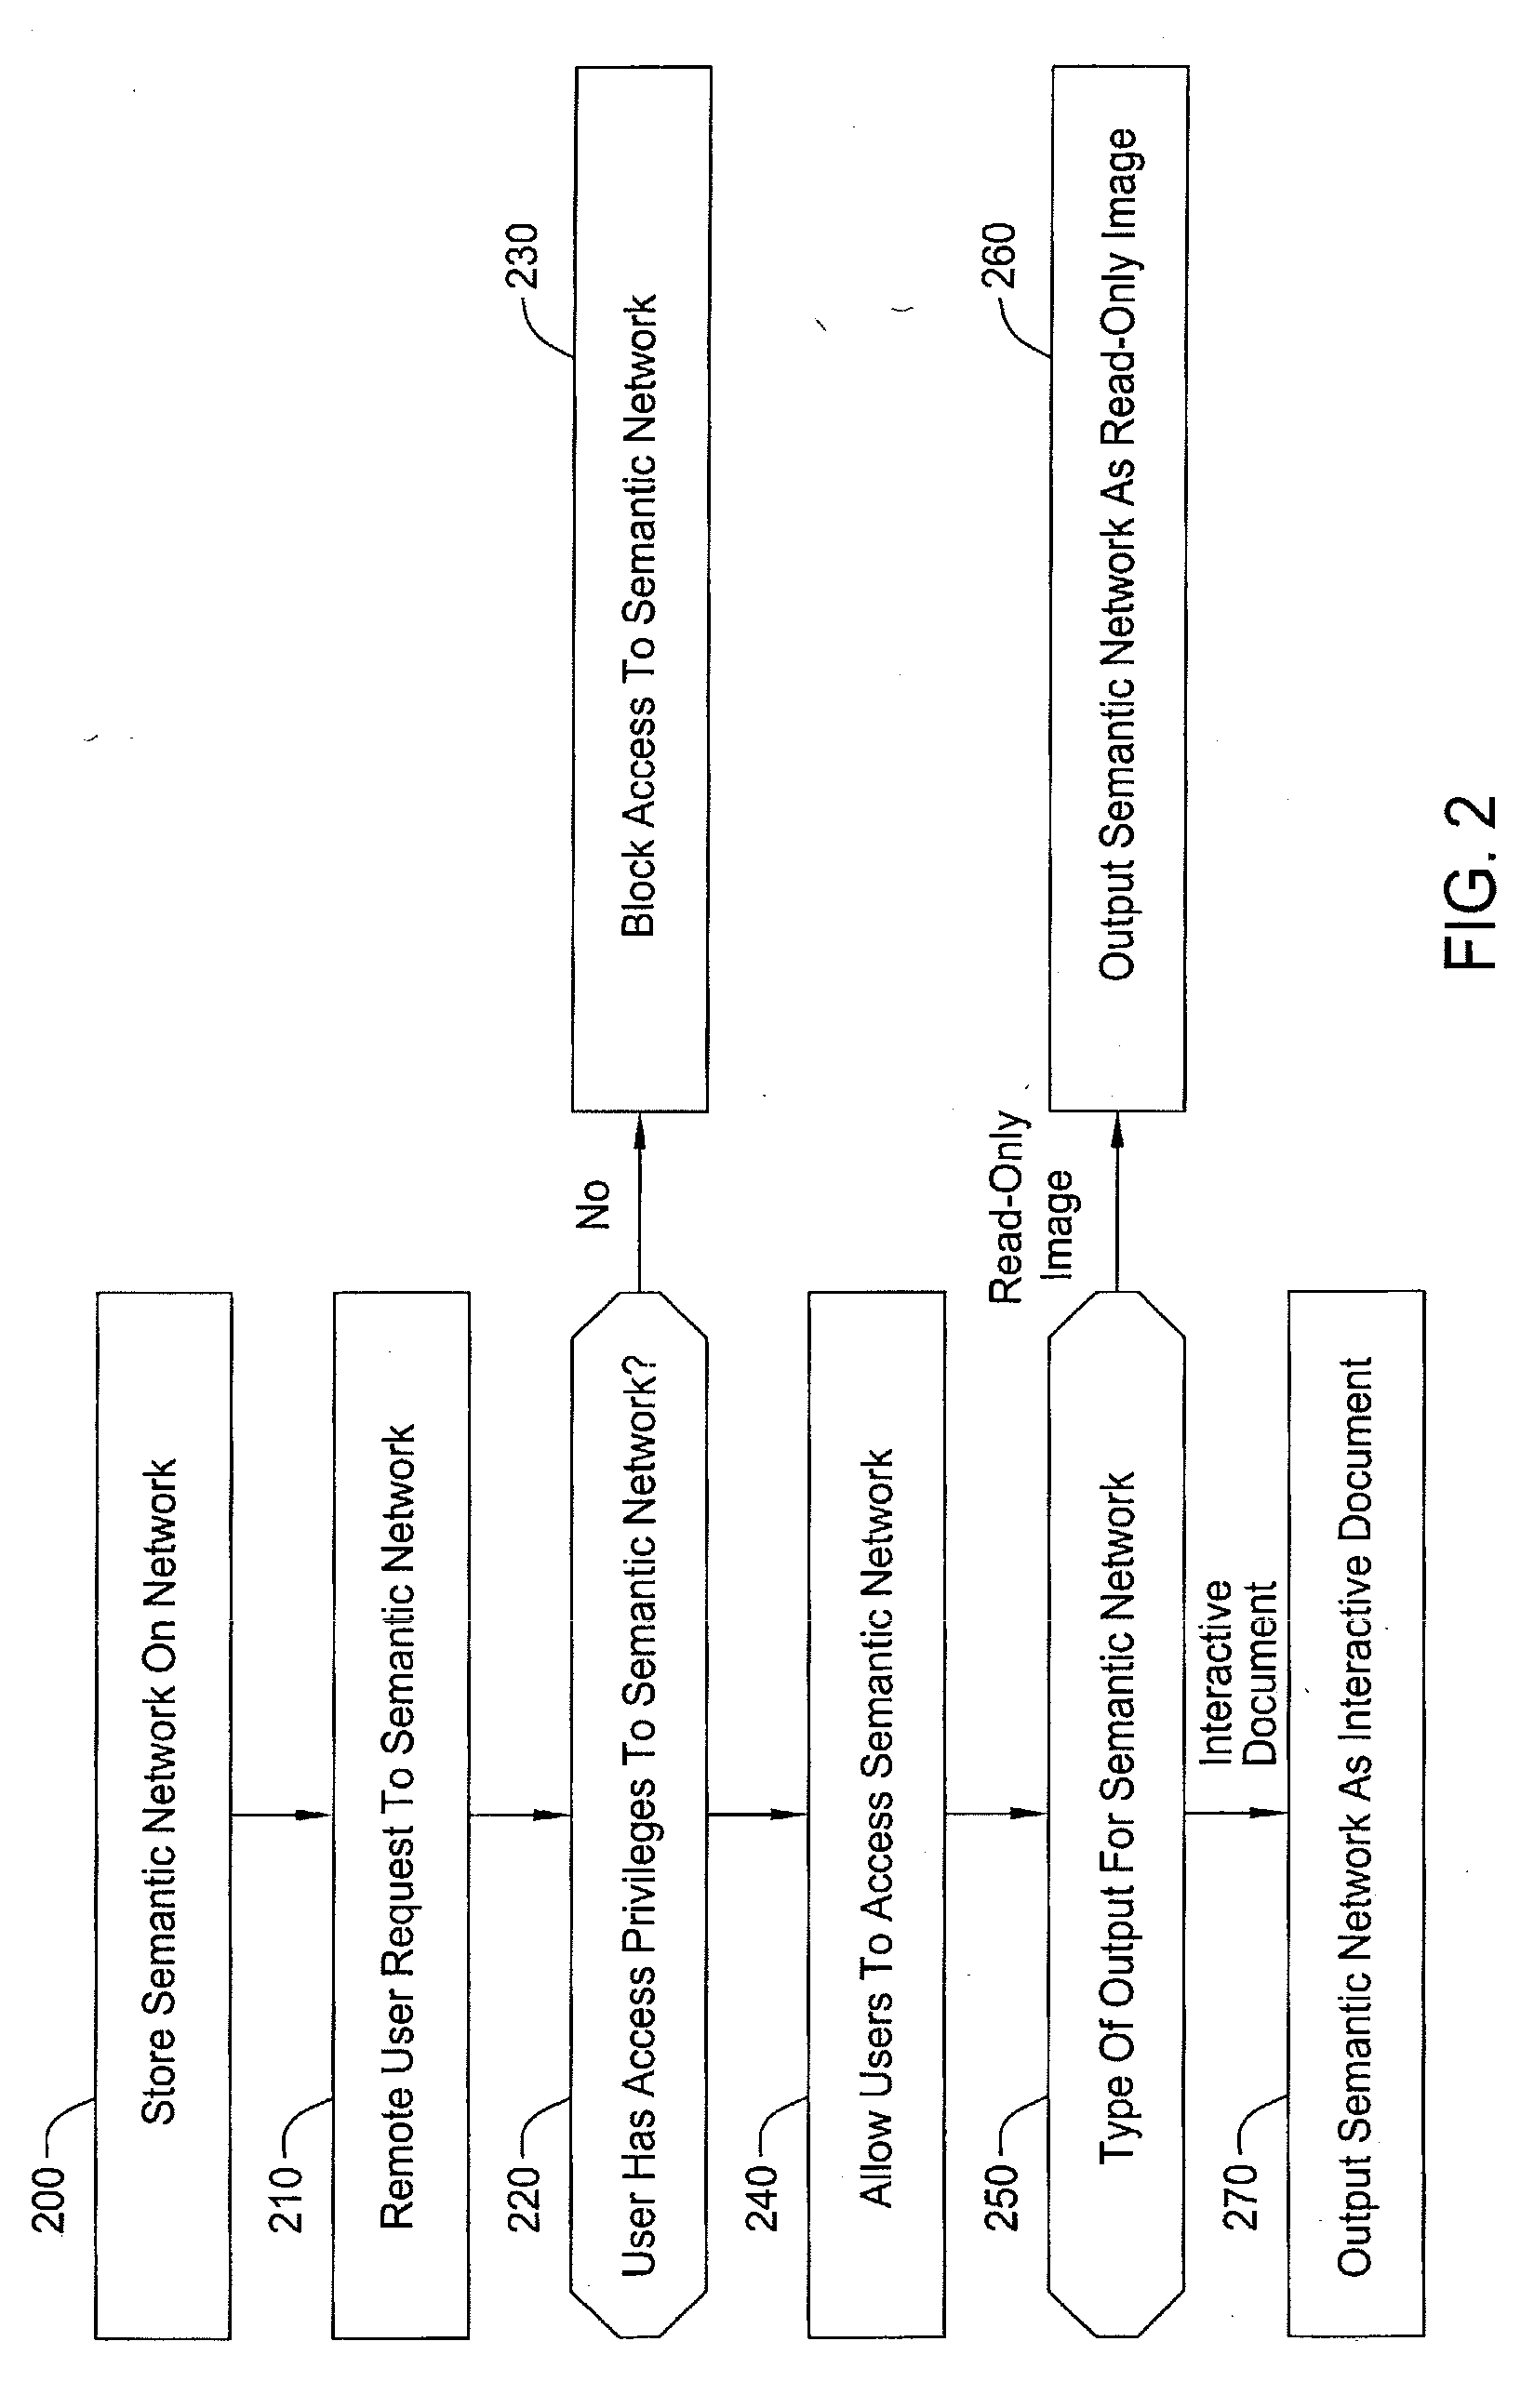 Methods and apparatus for storing, organizing, and sharing multimedia objects and documents